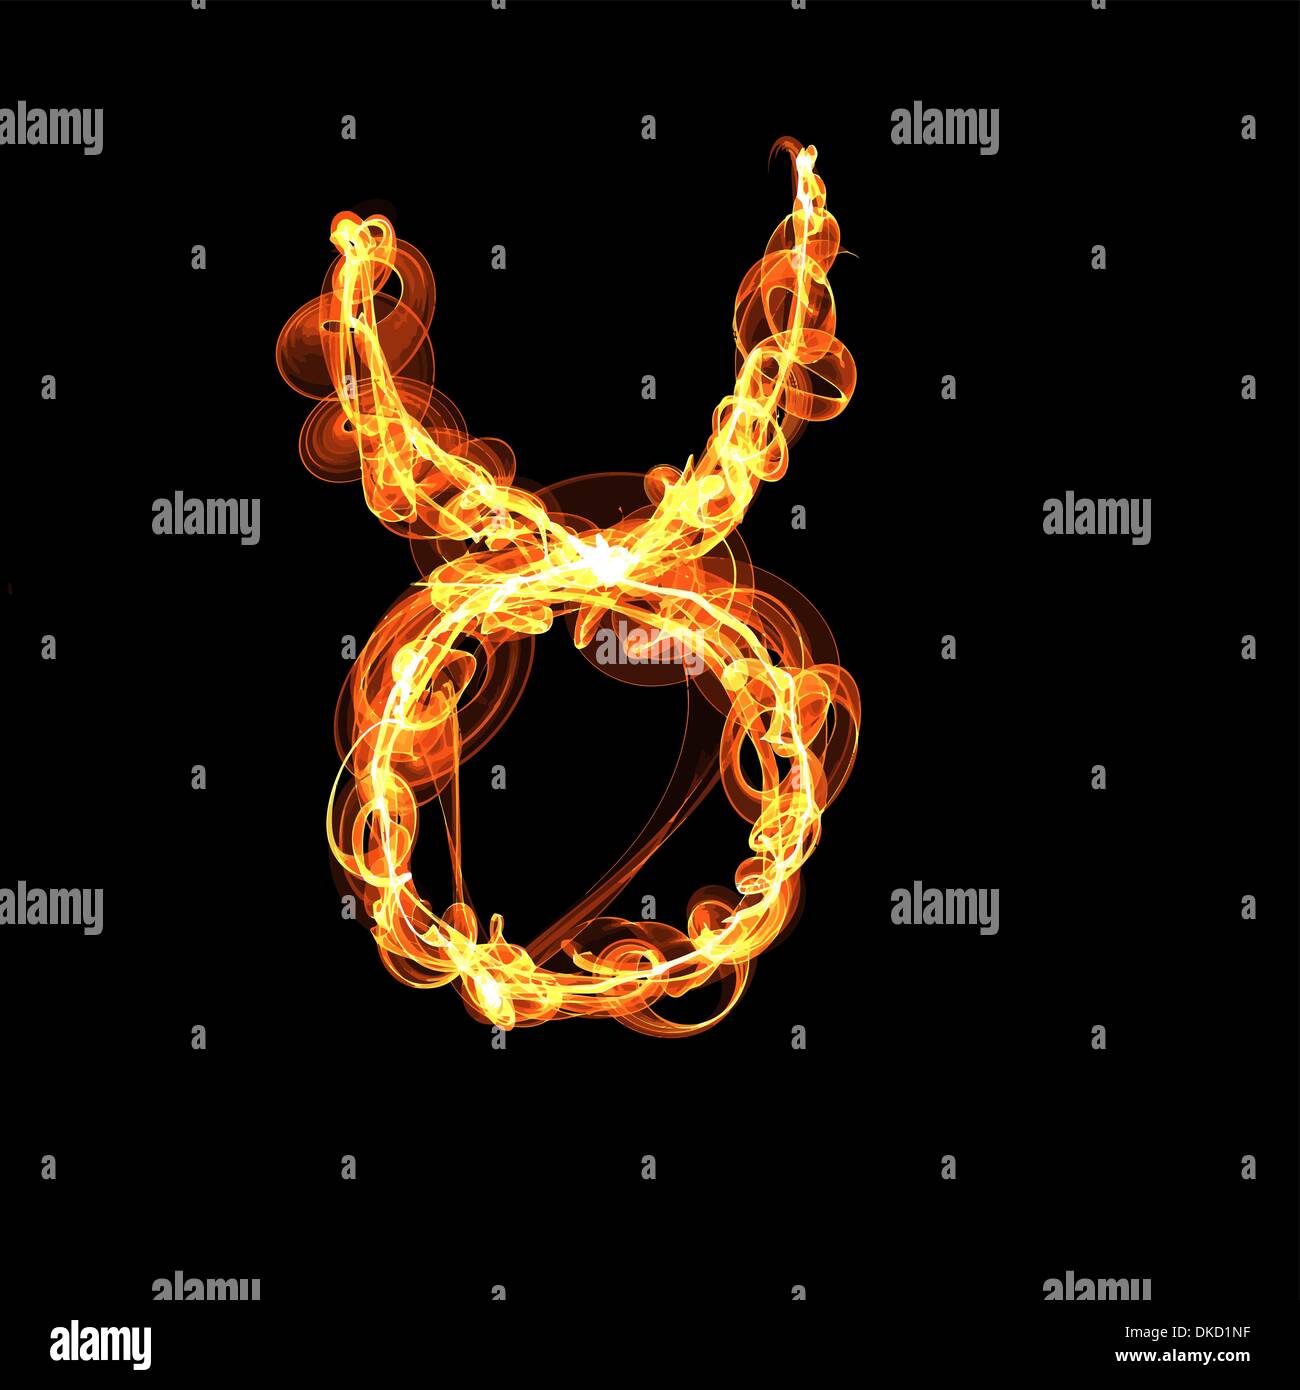 45500 Zodiac Earth Sign Stock Photos Pictures  RoyaltyFree Images   iStock  Zodiac fire sign Zodiac sign Zodiac water sign